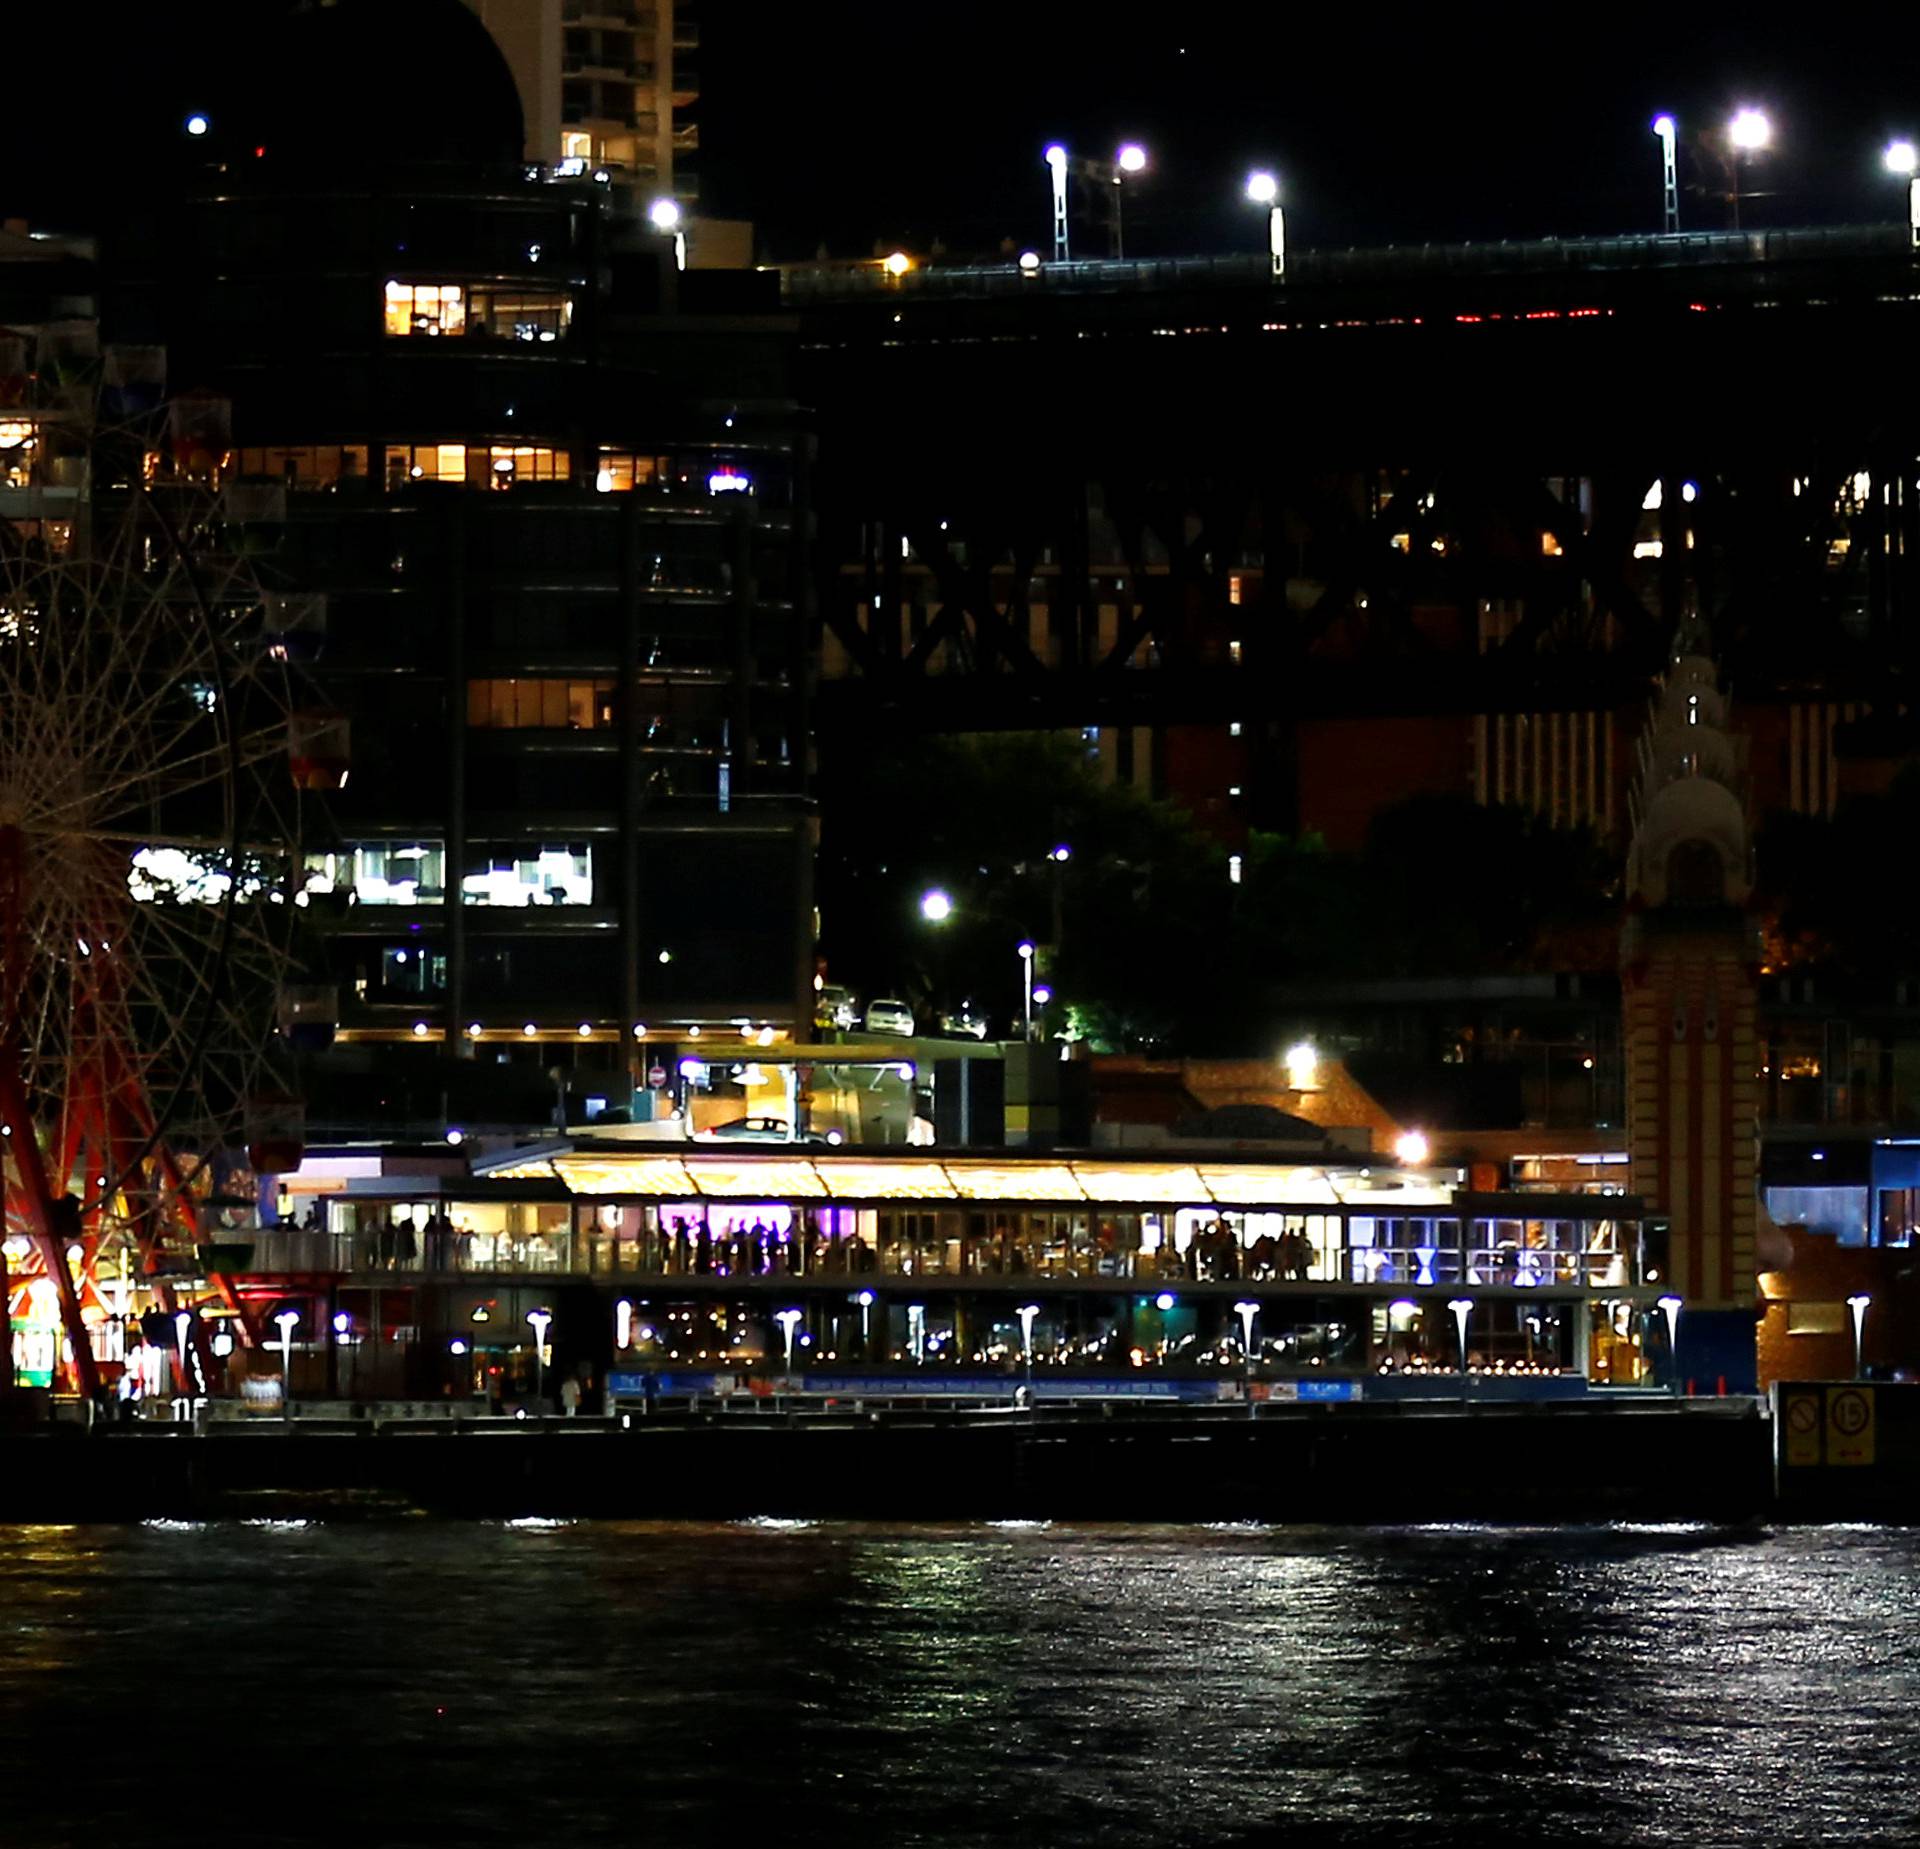 The rides at Luna Park seen during the tenth anniversary of Earth Hour in Sydney